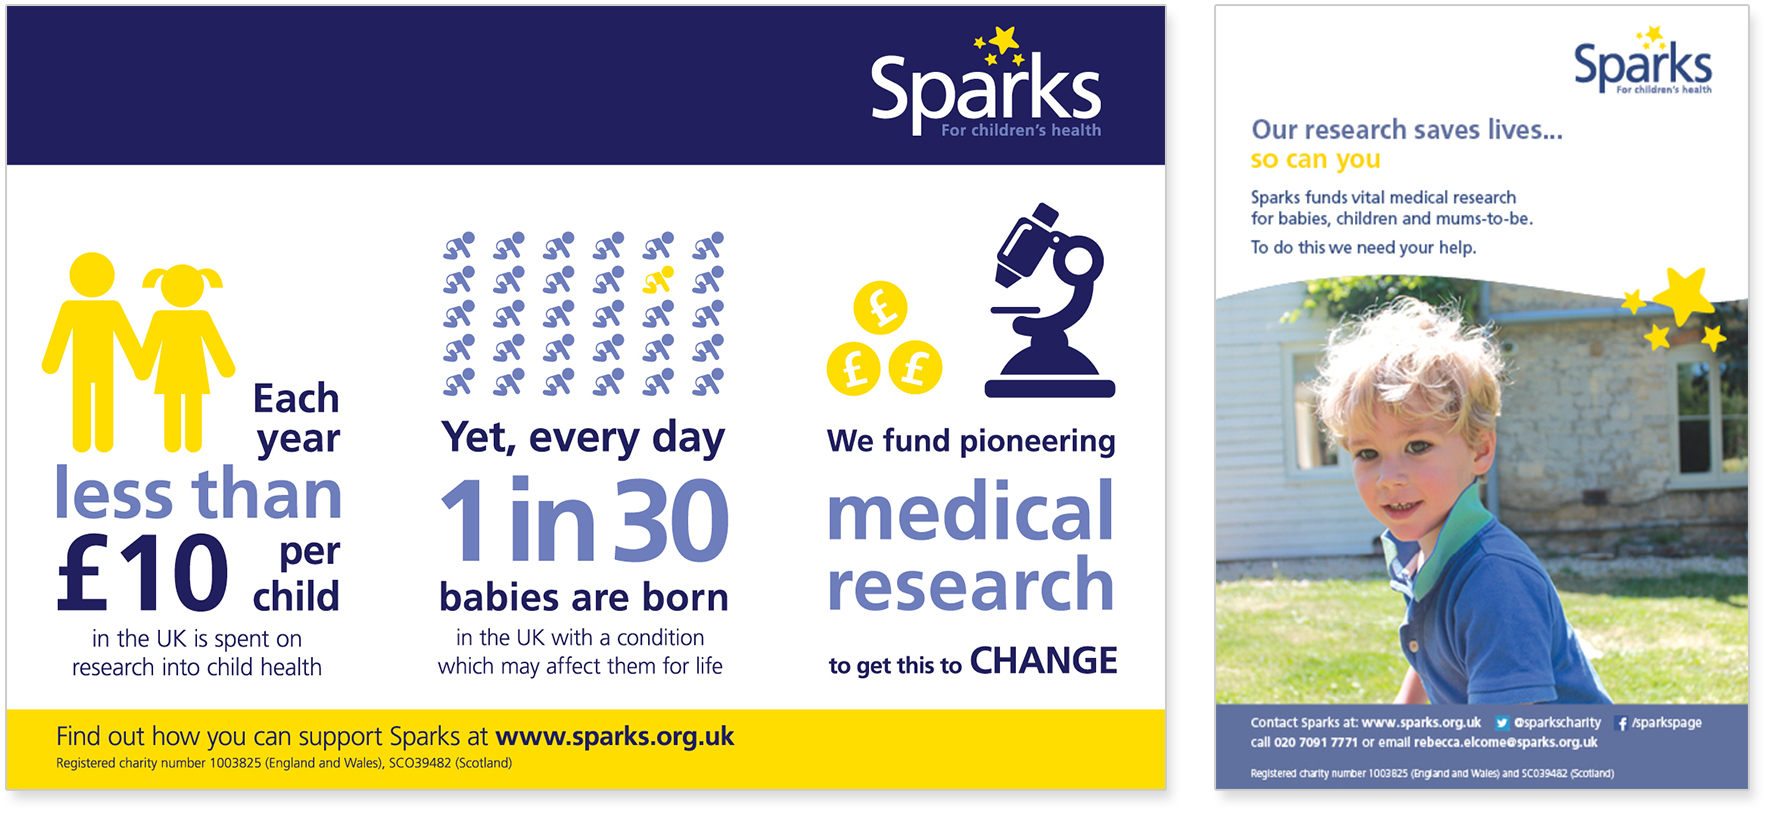 Advertisements for Sparks